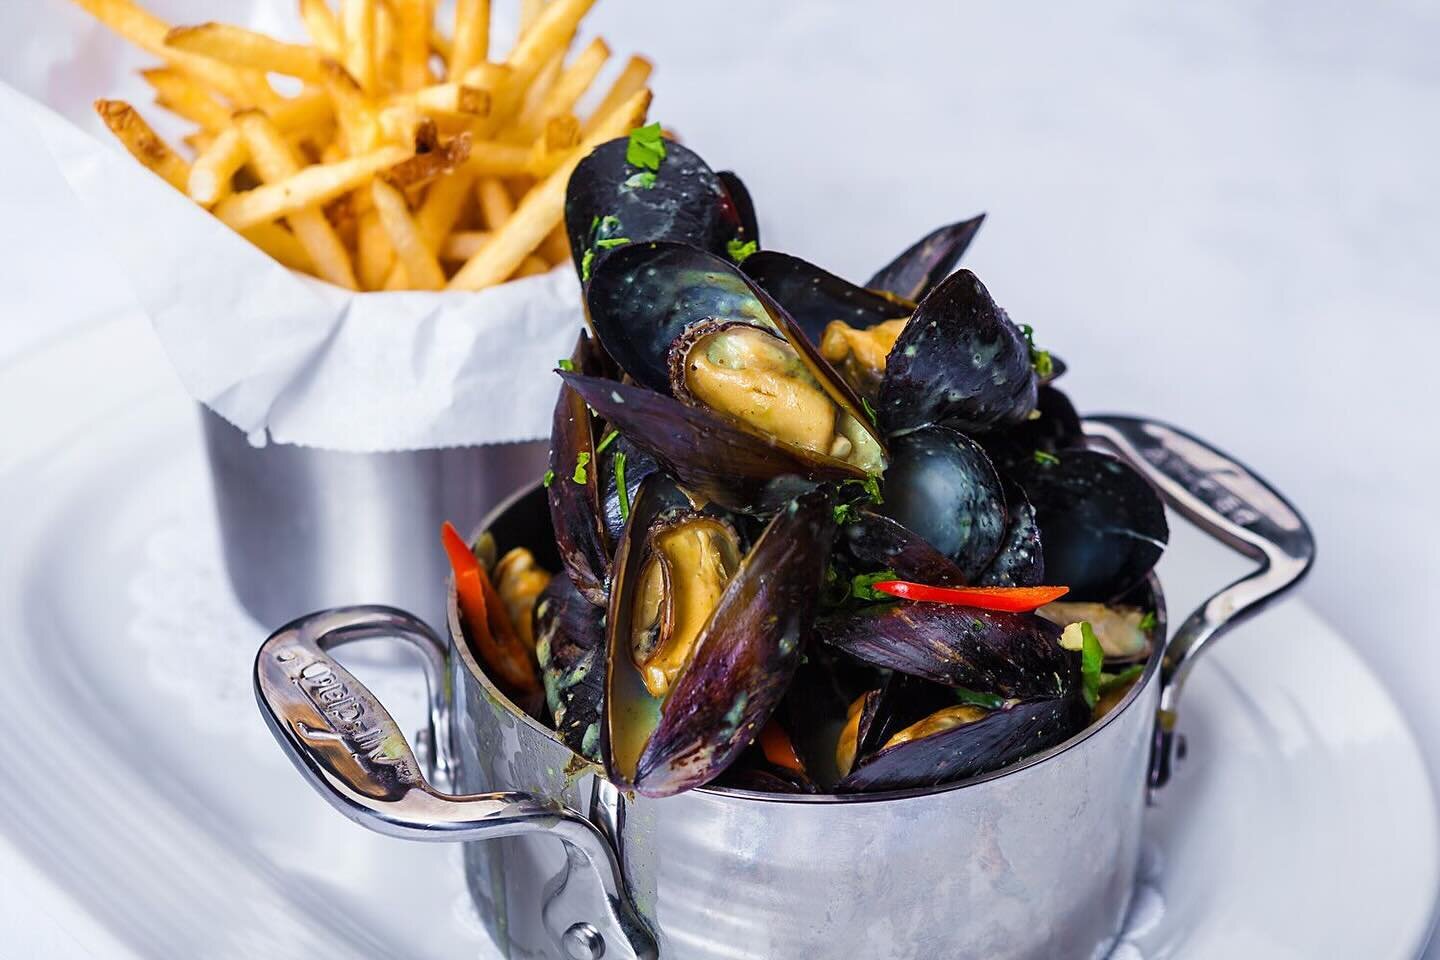 This damp grey weather has us craving some comfort food.  So tonight we&rsquo;re offering our Moules Frites for just $20.  That&rsquo;s right,  Prince Edward Island Mussels with curry coconut milk sauce and delicious, crispy pommes frites for just $2